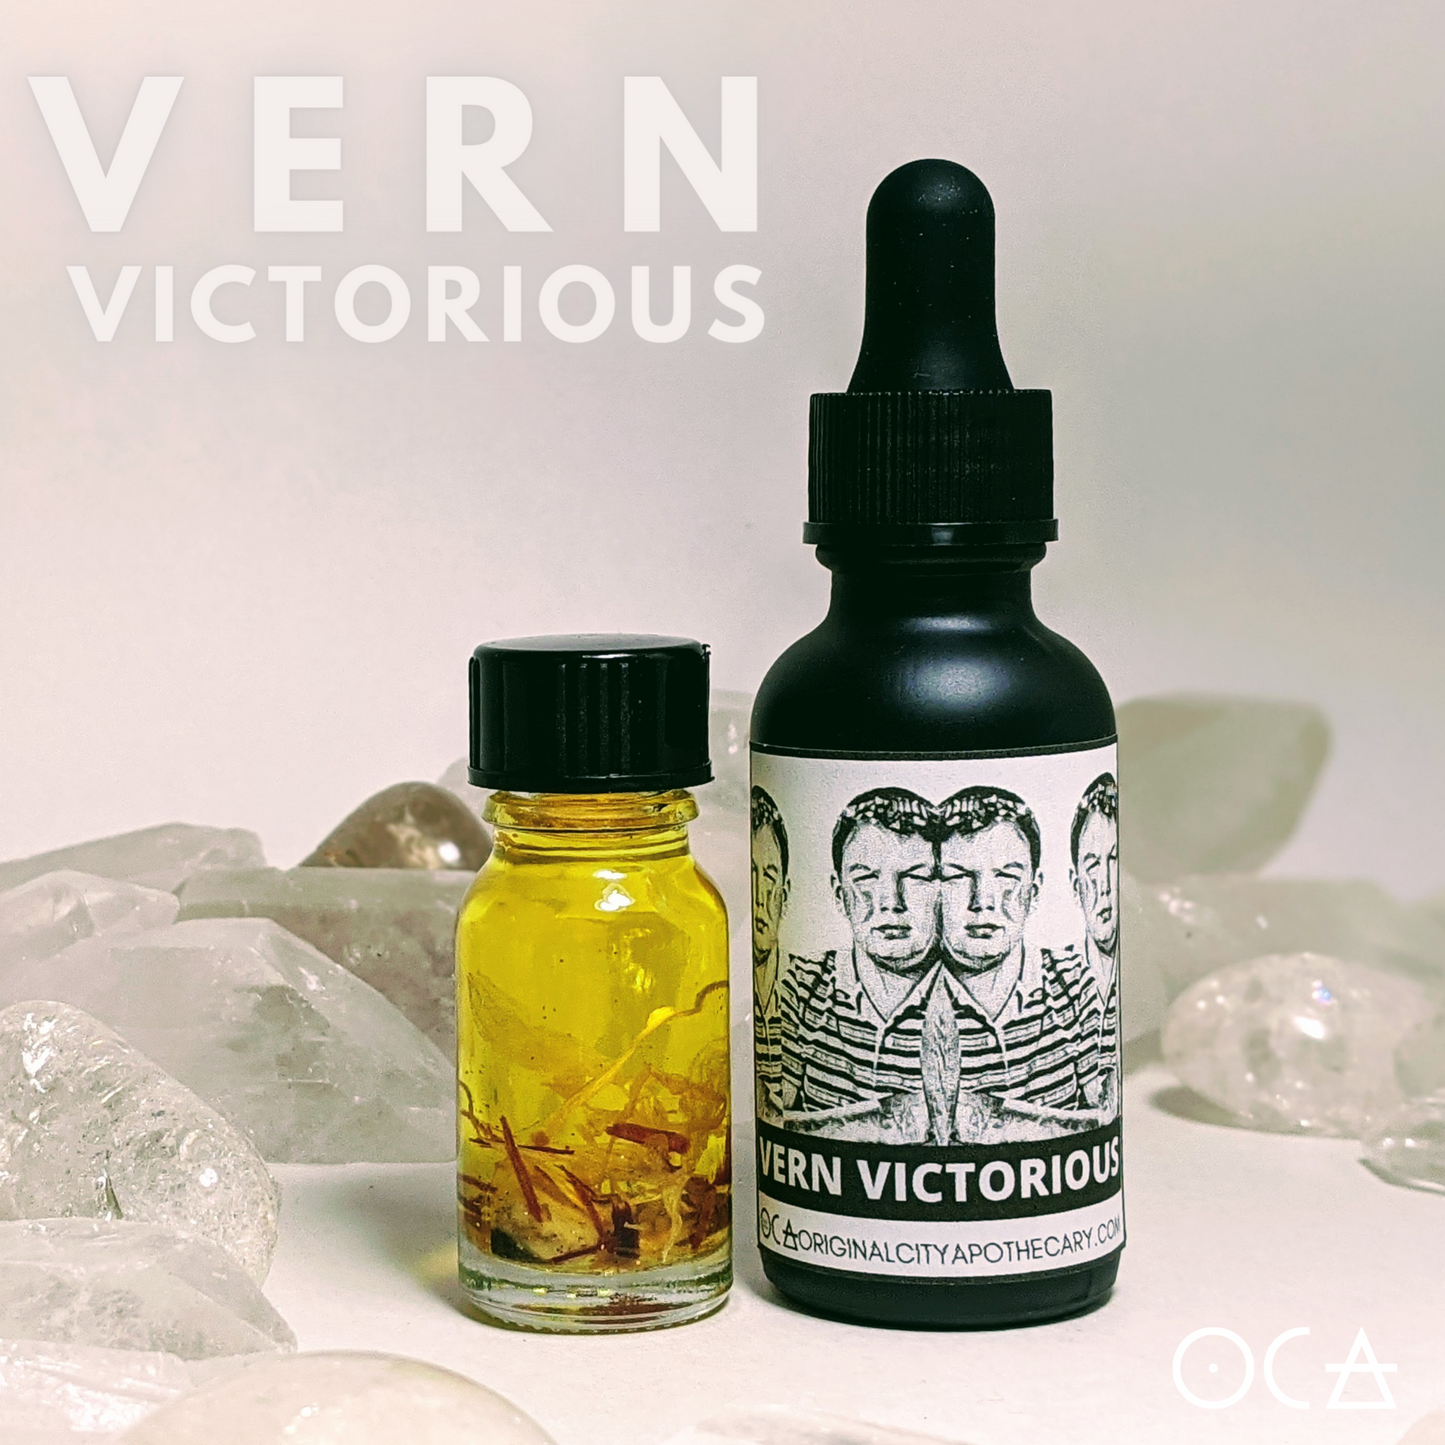 Vern Victorious Oil/Perfume/Cologne (inspired by Stand by Me)